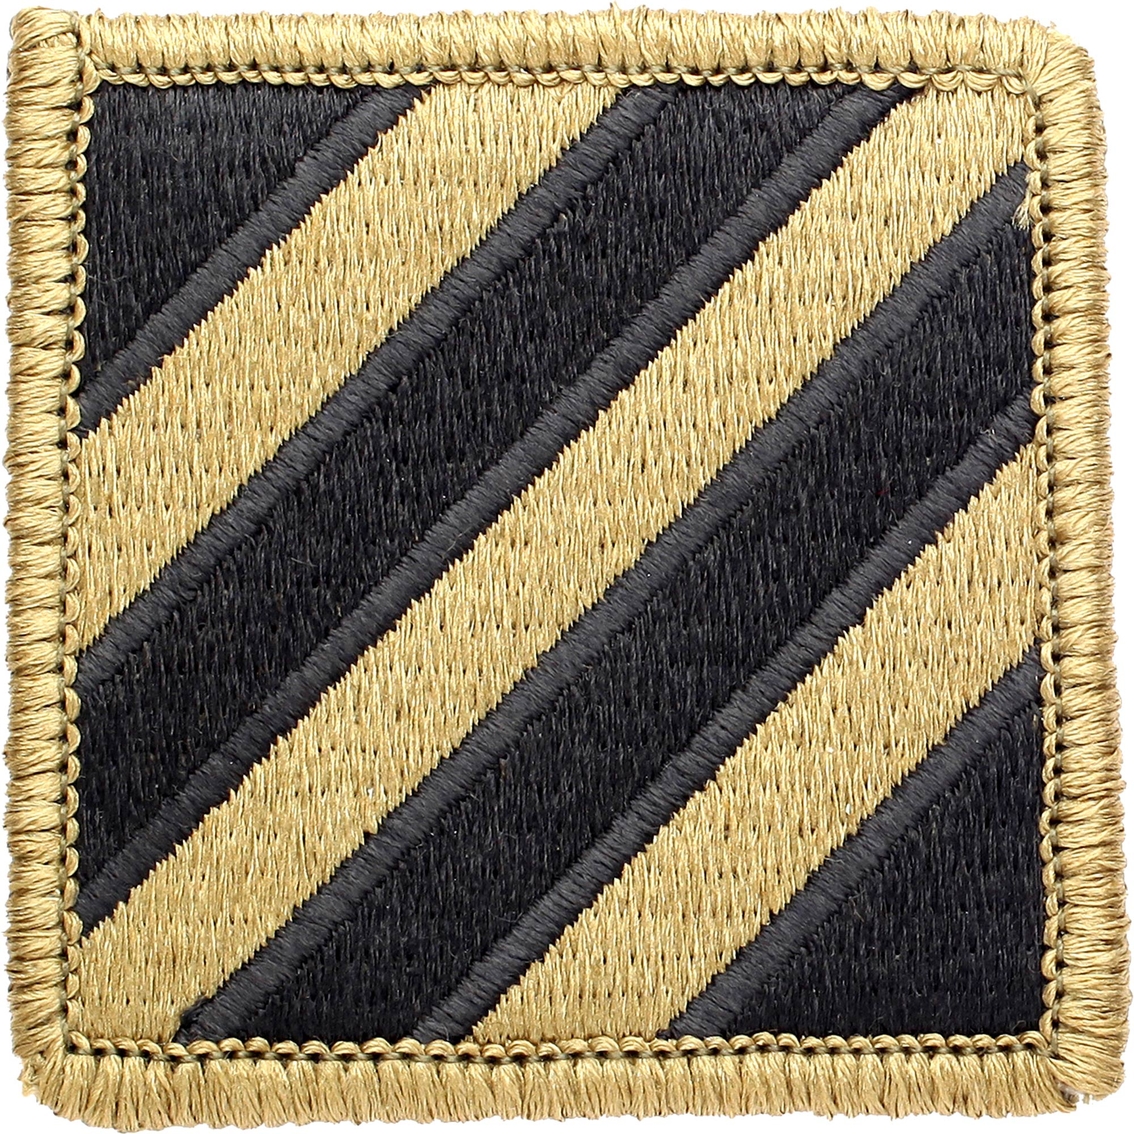 Army Patch 3rd Infantry Division merrowed edge tan 